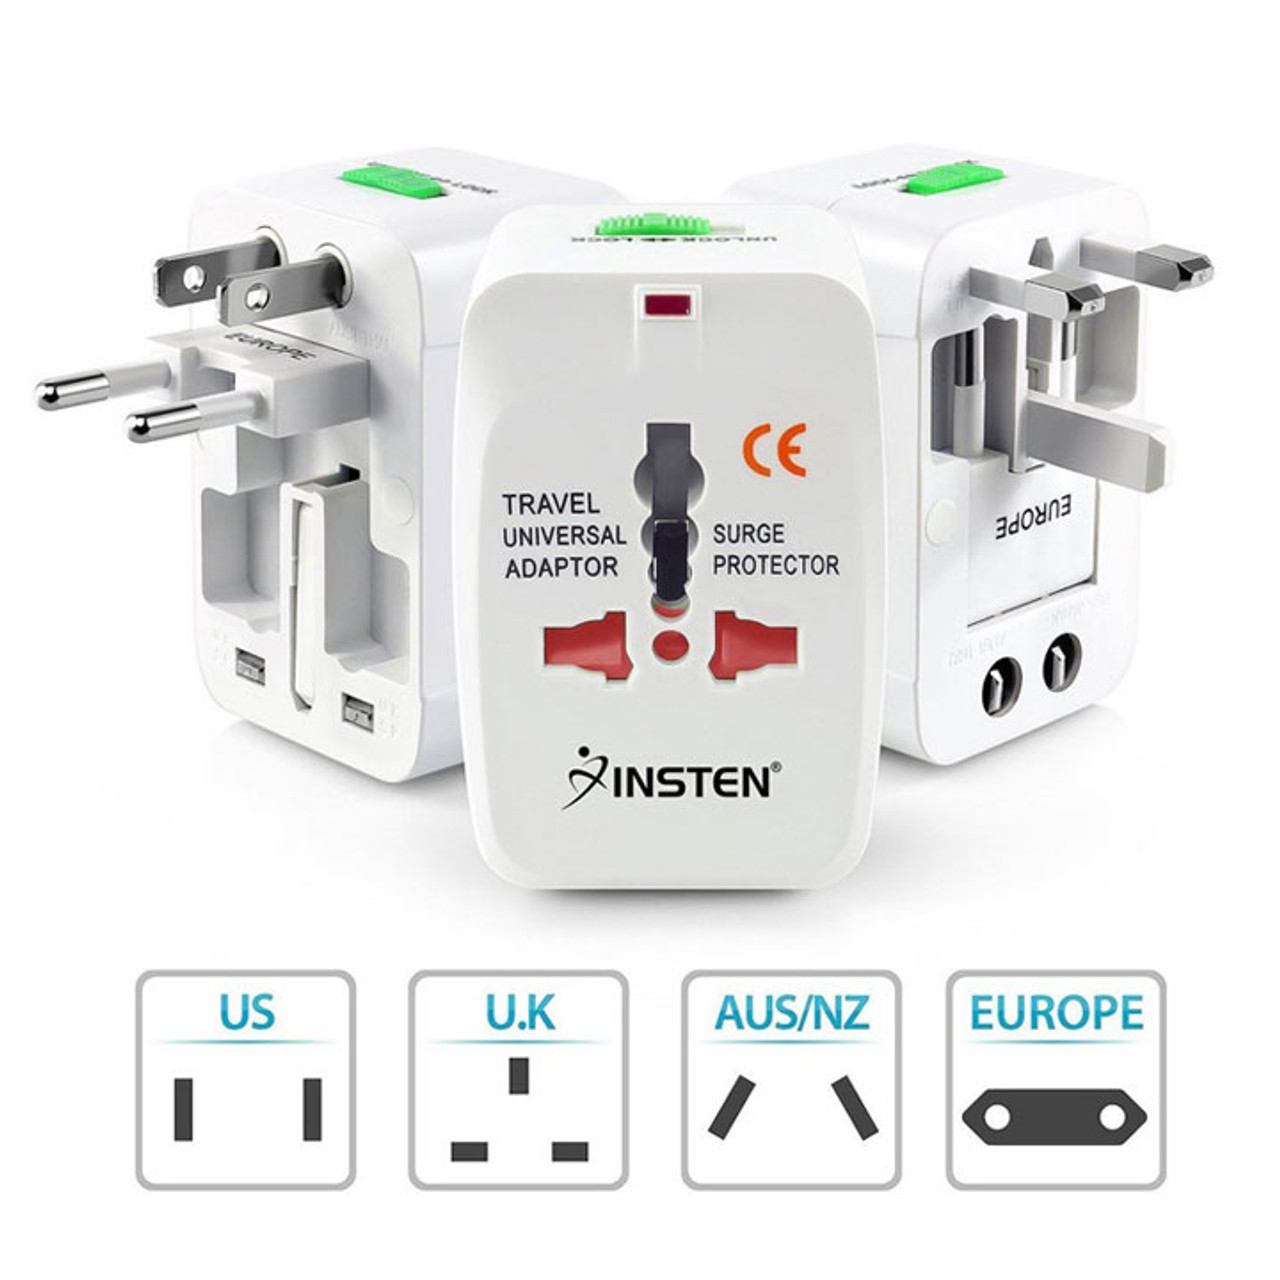 https://cdn11.bigcommerce.com/s-idr2t/images/stencil/1280x1280/products/185/1097/Universal-Travel-Adapter-UK-US__79954.1526564035.jpg?c=2?imbypass=on